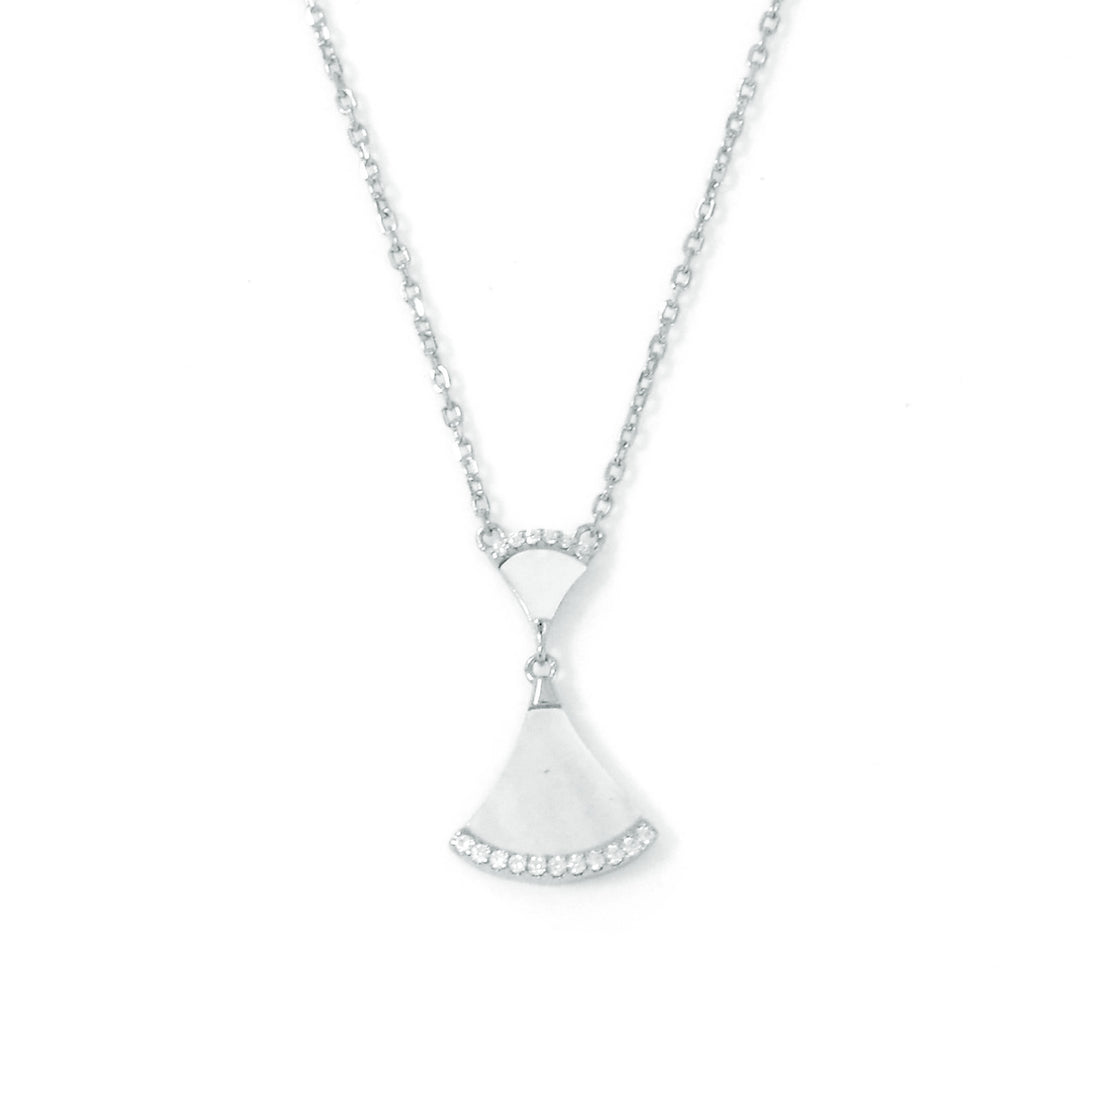 Luxurious Silver Necklace with Teardrop Mother of Pearl Pendant and Sparkling Zircon